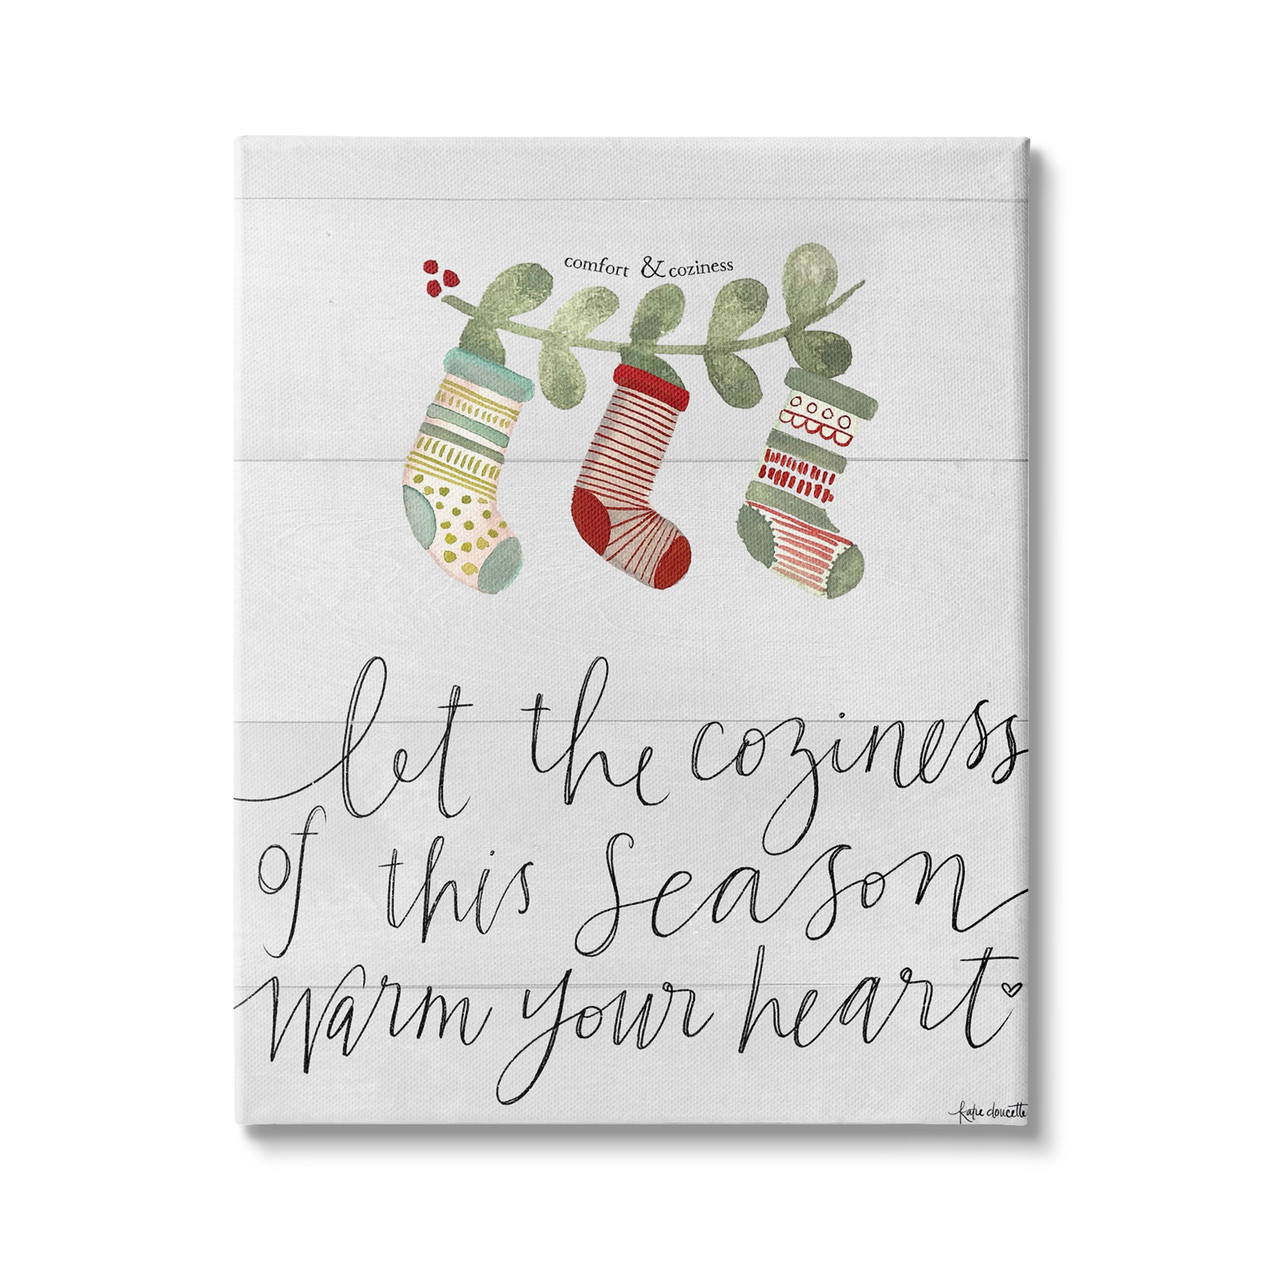 Christmas Stocking Tags - Quote the Walls